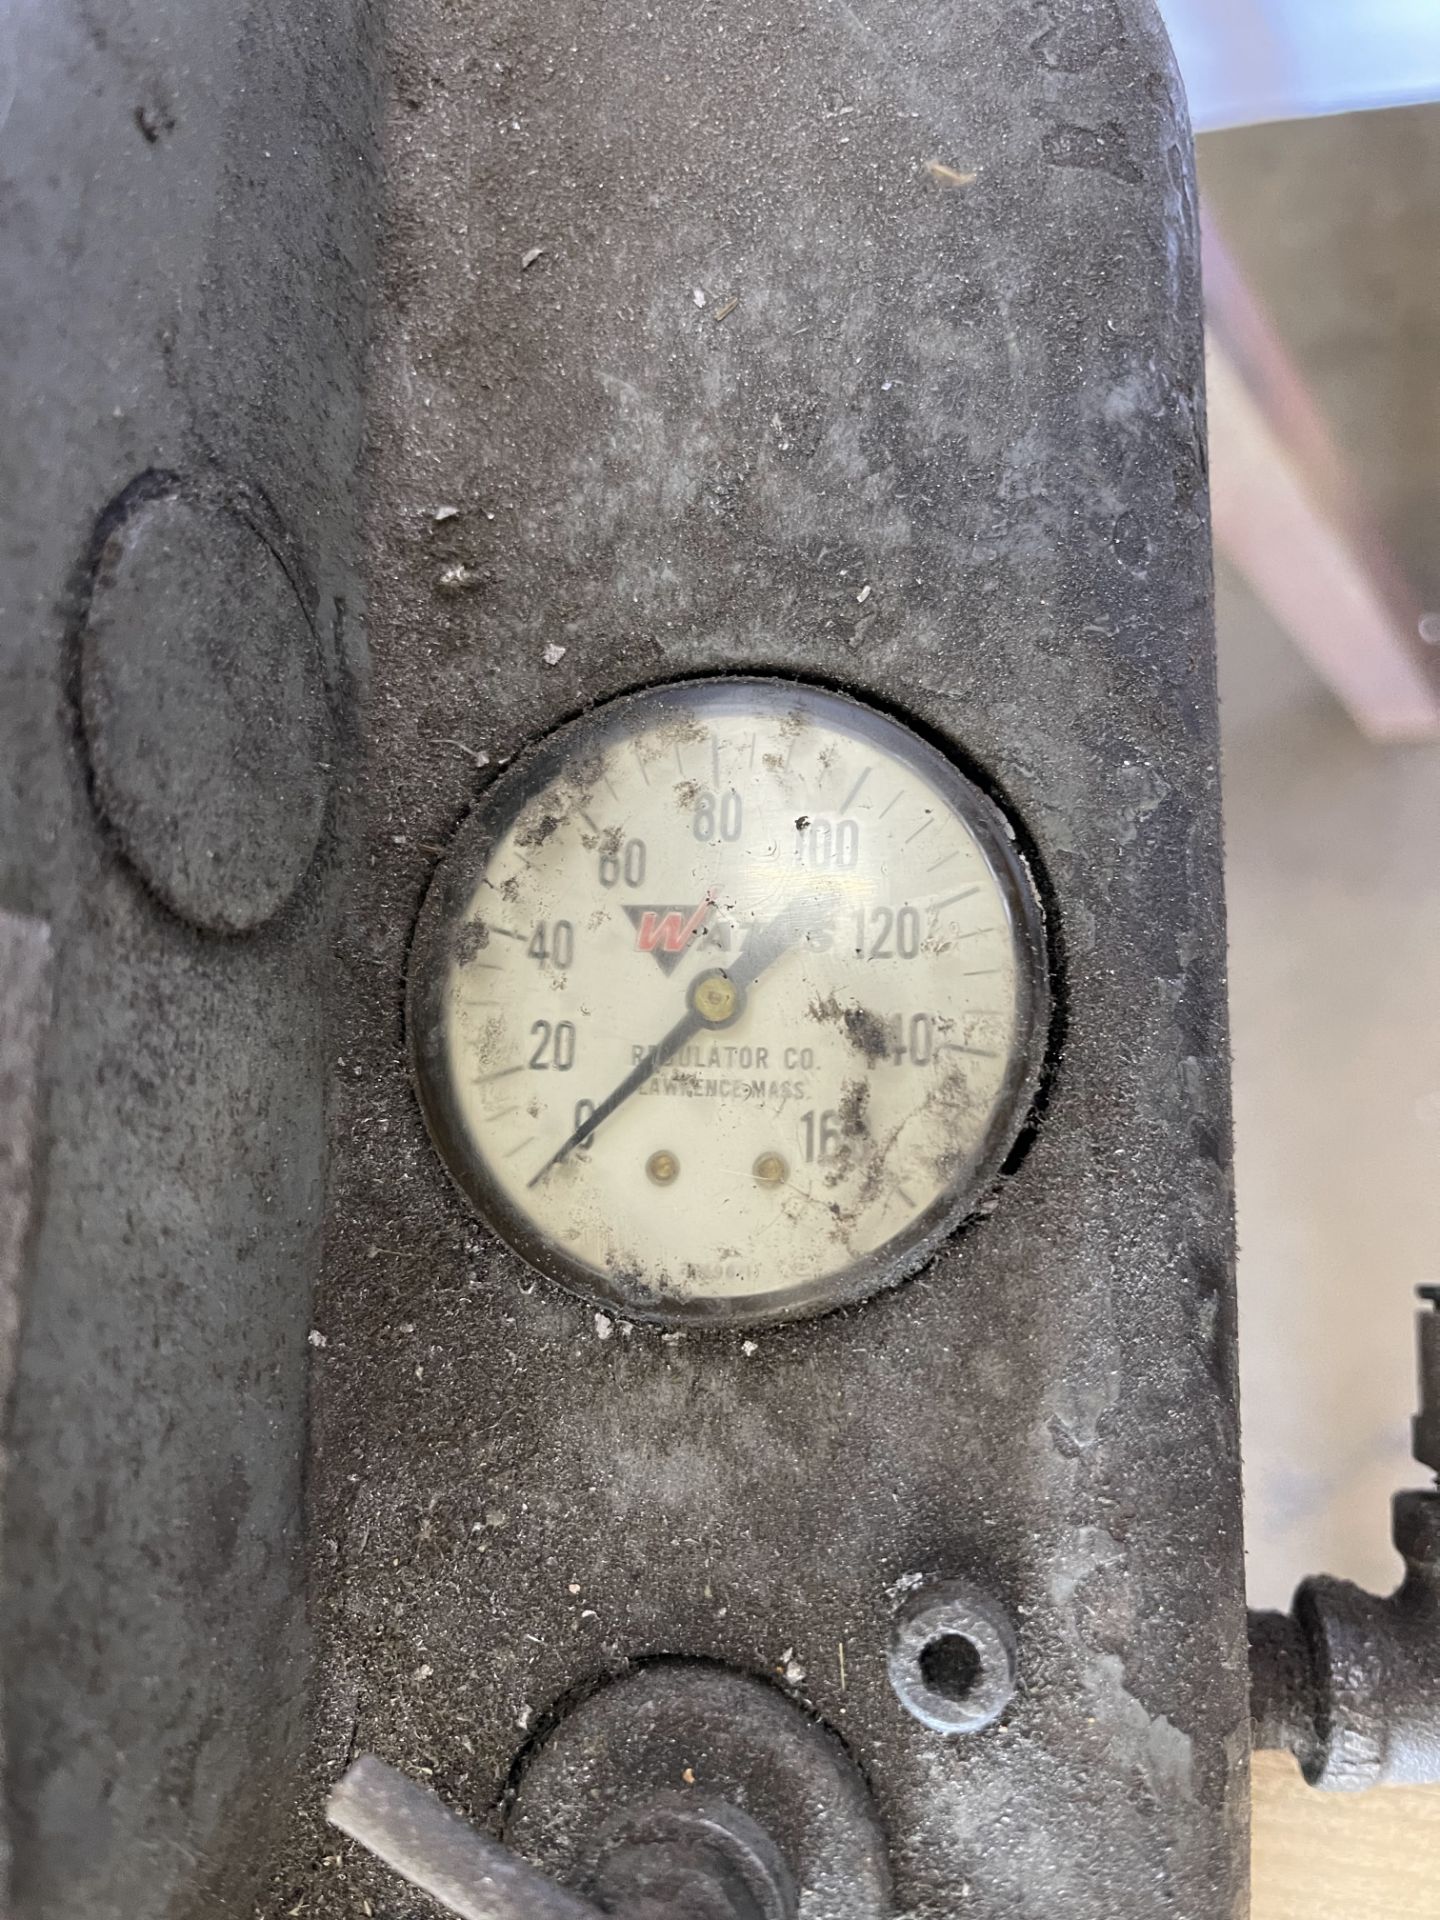 GEO. T. Schmidt Marking tool, Model Number 3T electric/pnuematic; working condition unknown - Image 10 of 12